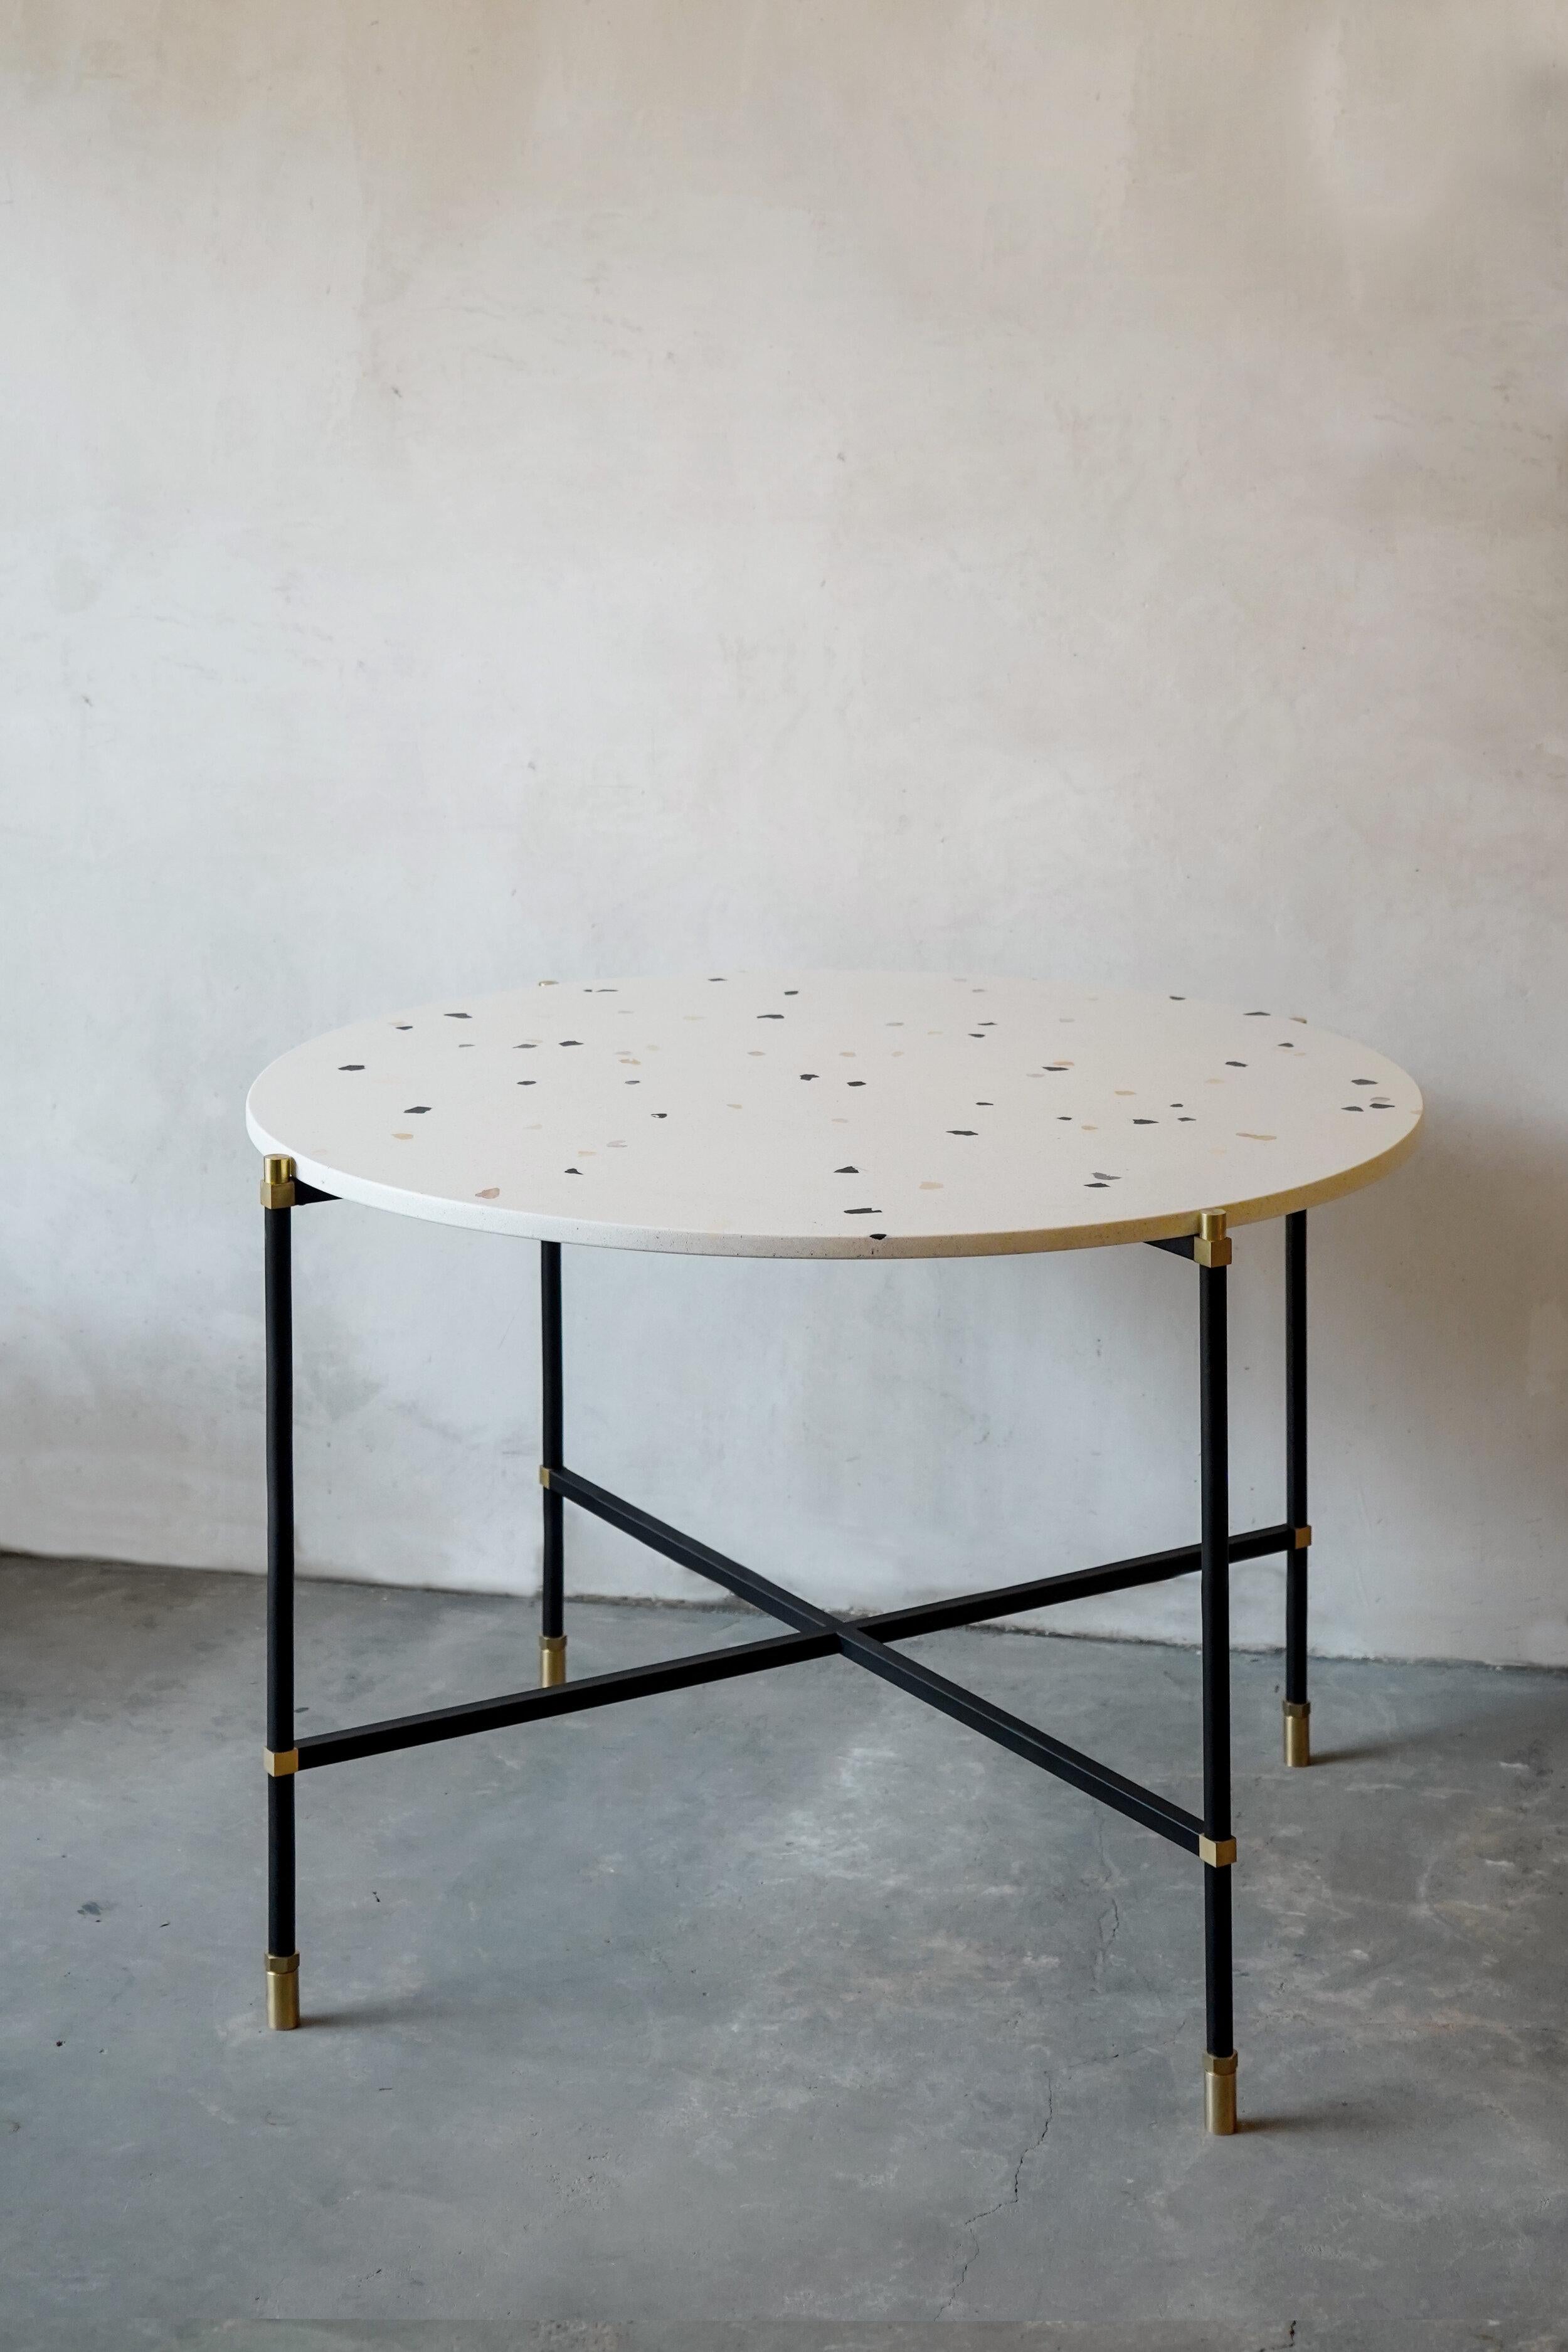 Simple round table 100 4 Legs by Contain
Dimensions: D100 x H76 cm 
Materials: iron, brass, terrazzo, marble, stone.
Available in different finishes and dimensions. 

The Connector furniture collection is based on single assembly pieces that